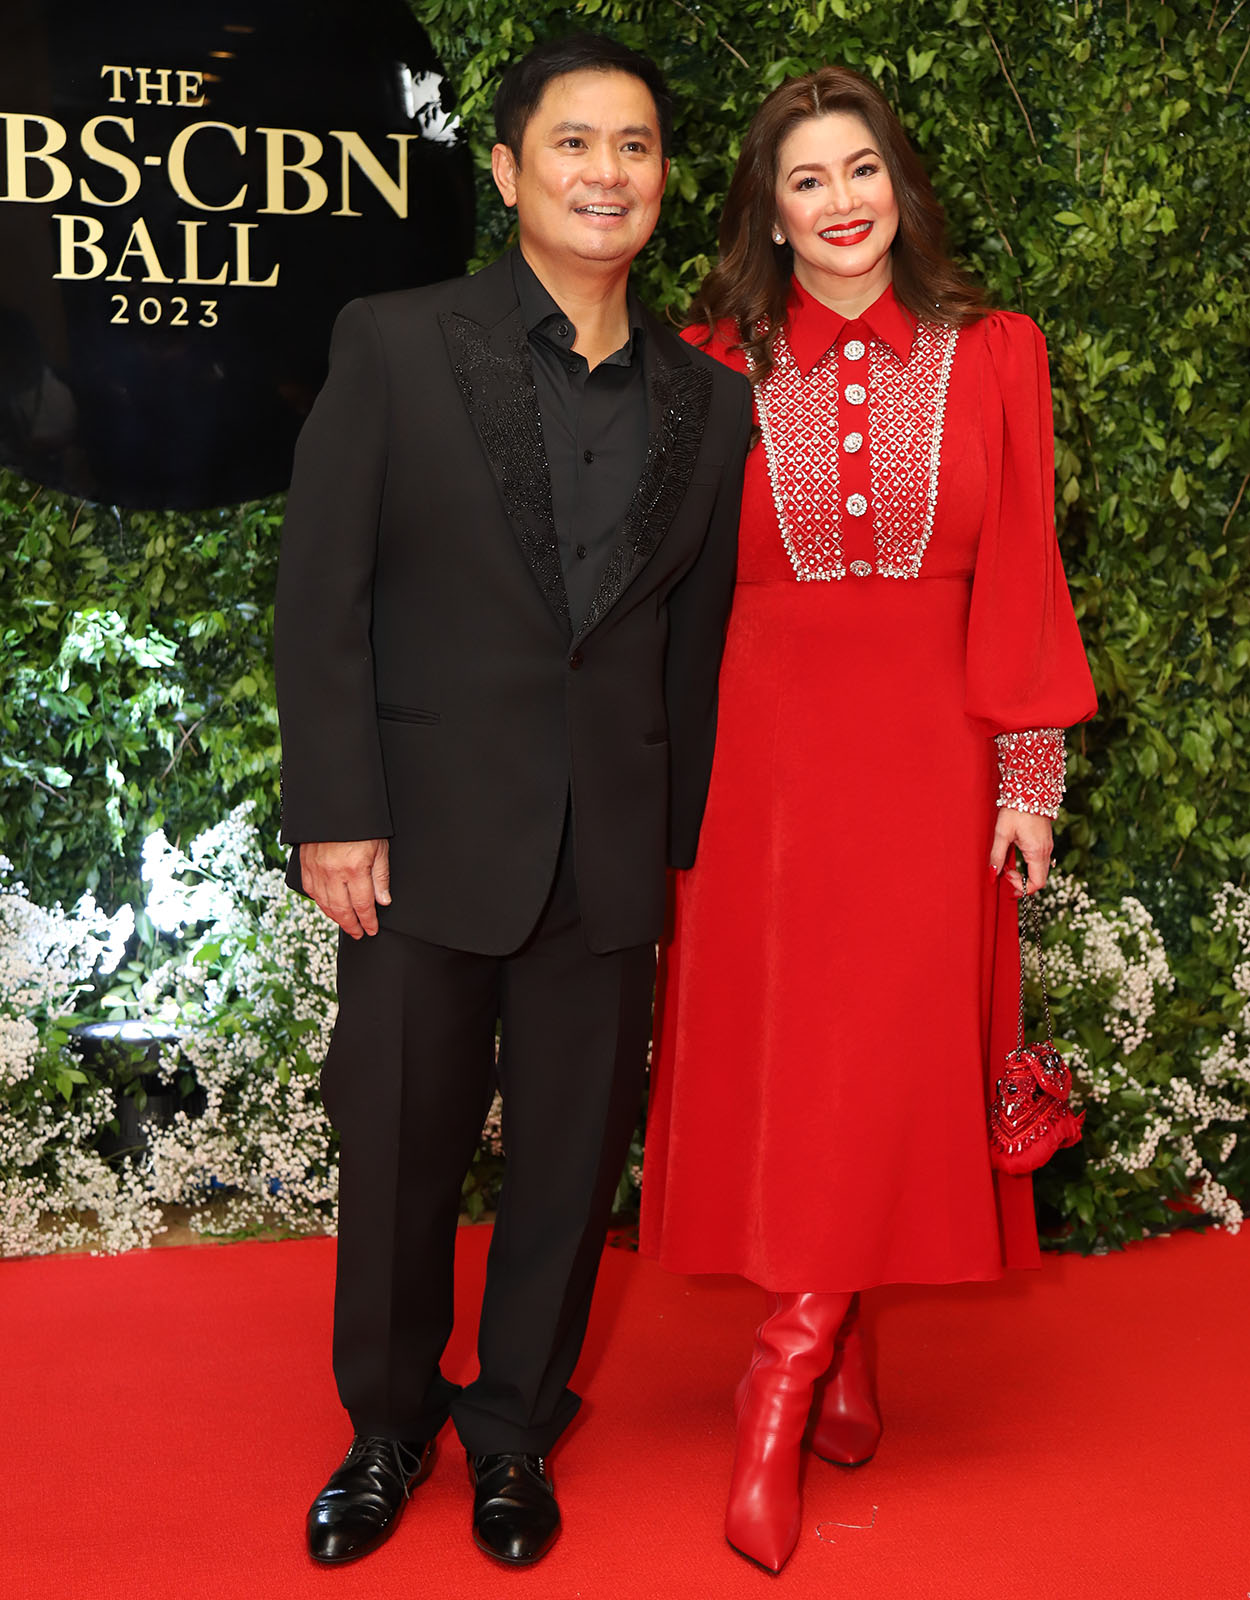 Celebrity Parents Who Attended the ABS-CBN Ball 2023